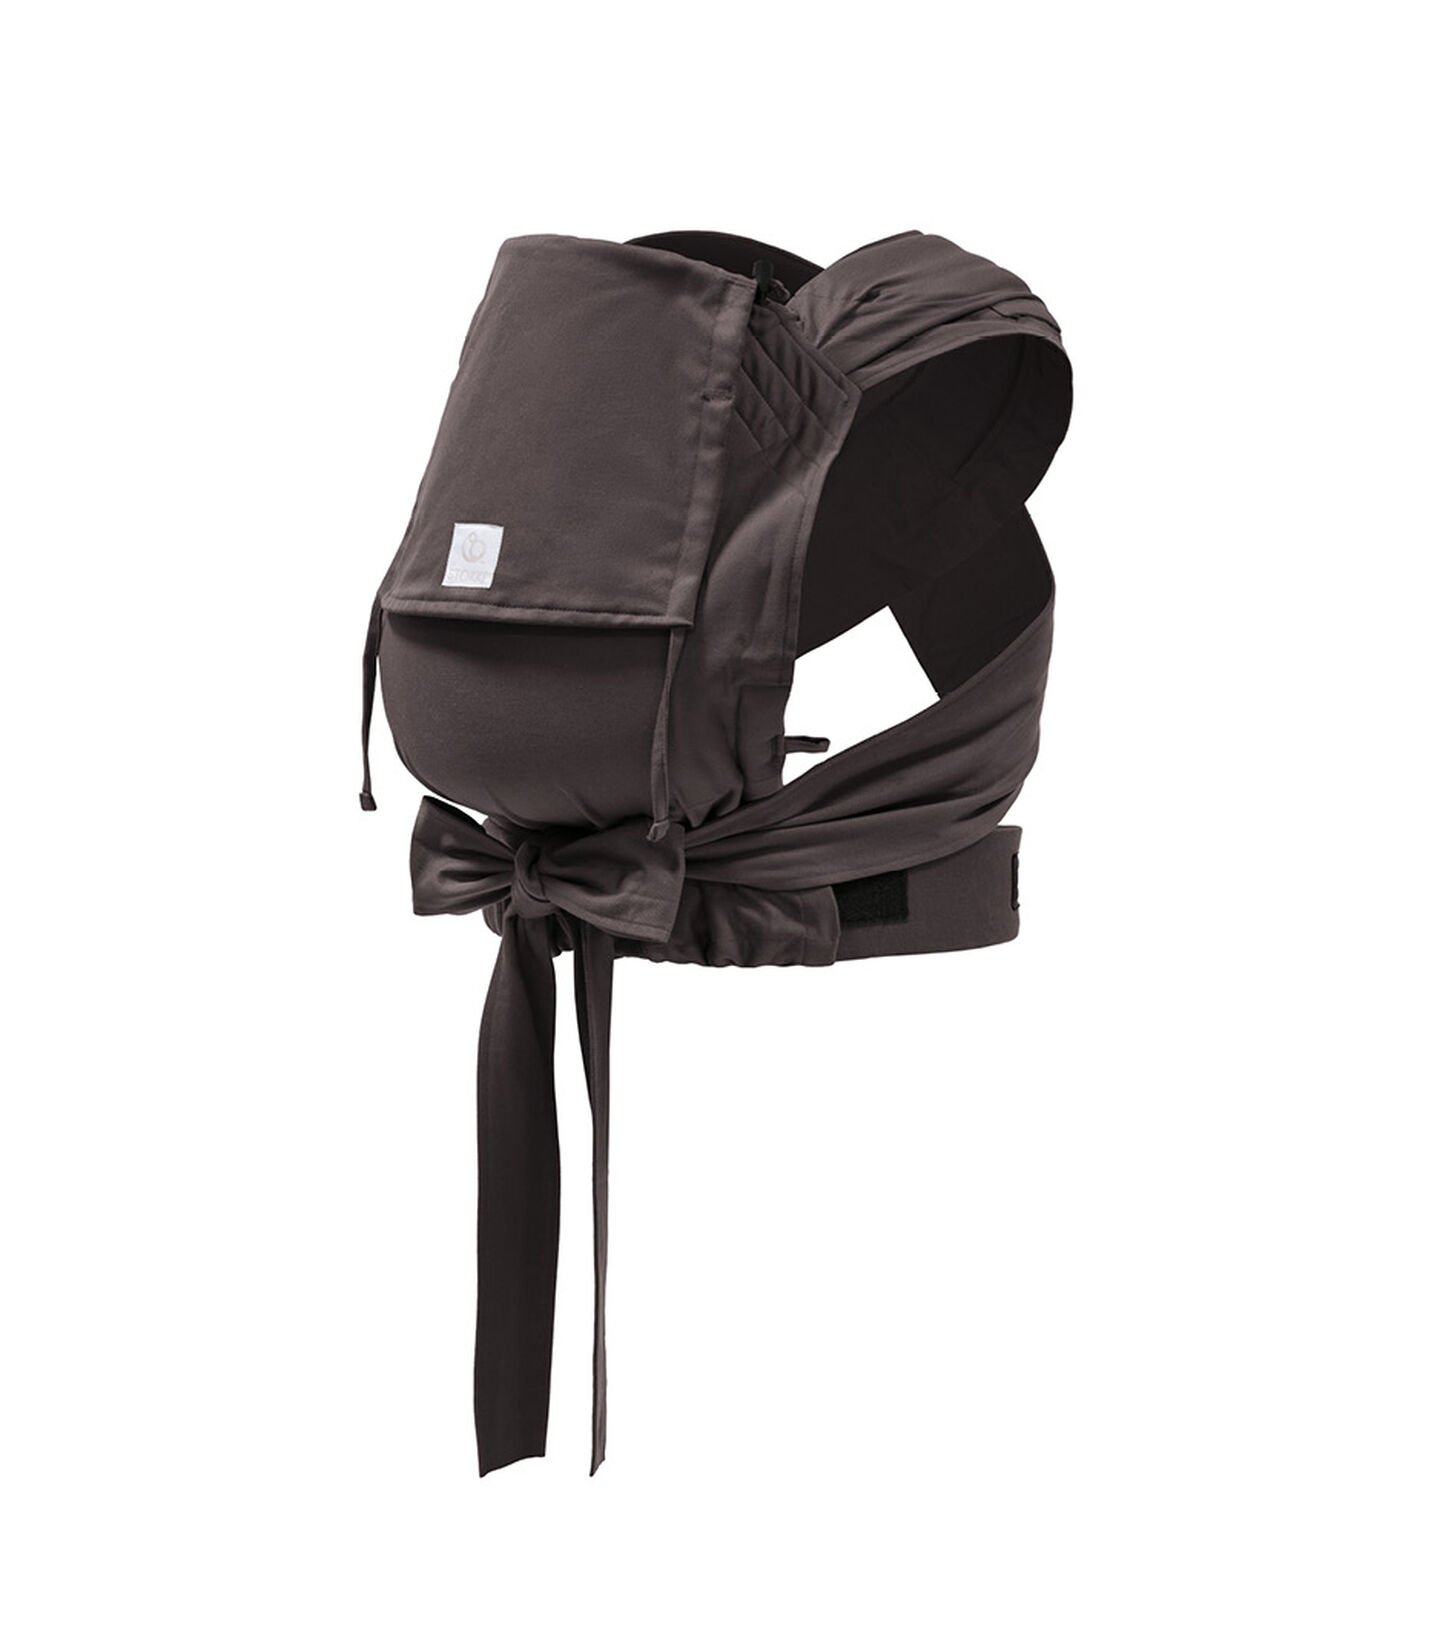 Stokke® Limas™ Carrier. Espresso Brown. view 1